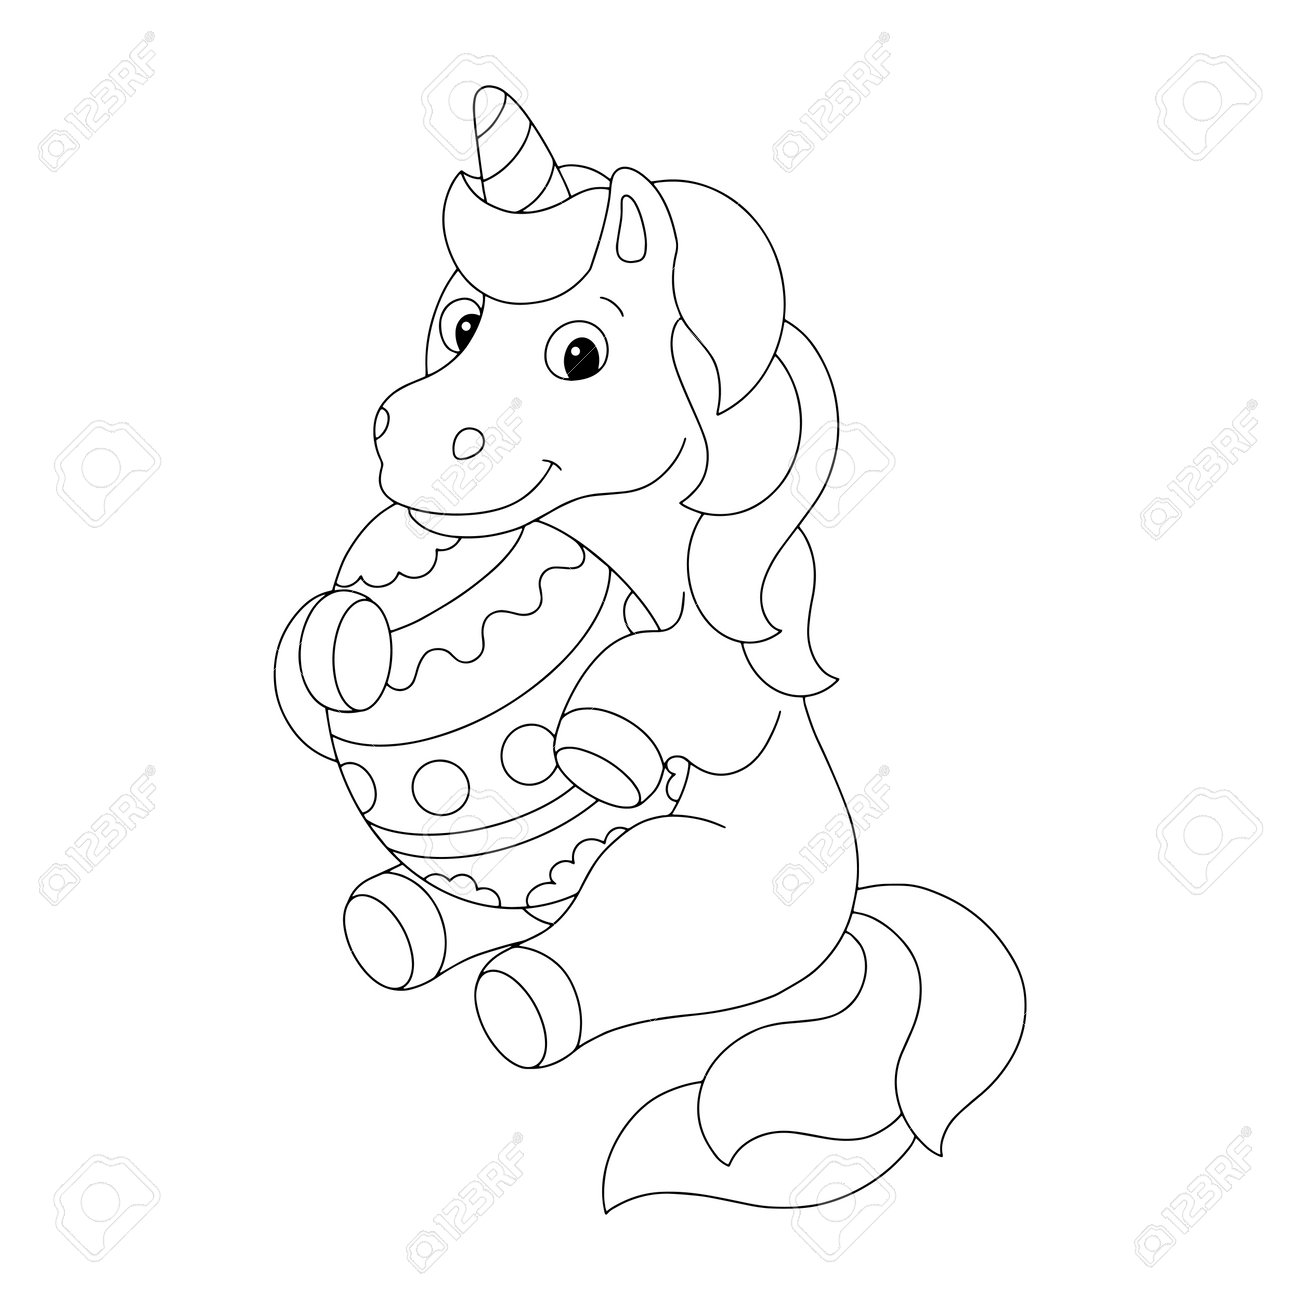 Coloring book page for kids a cute unicorn is holding an easter egg cartoon style character vector illustration isolated on white background royalty free svg cliparts vectors and stock illustration image